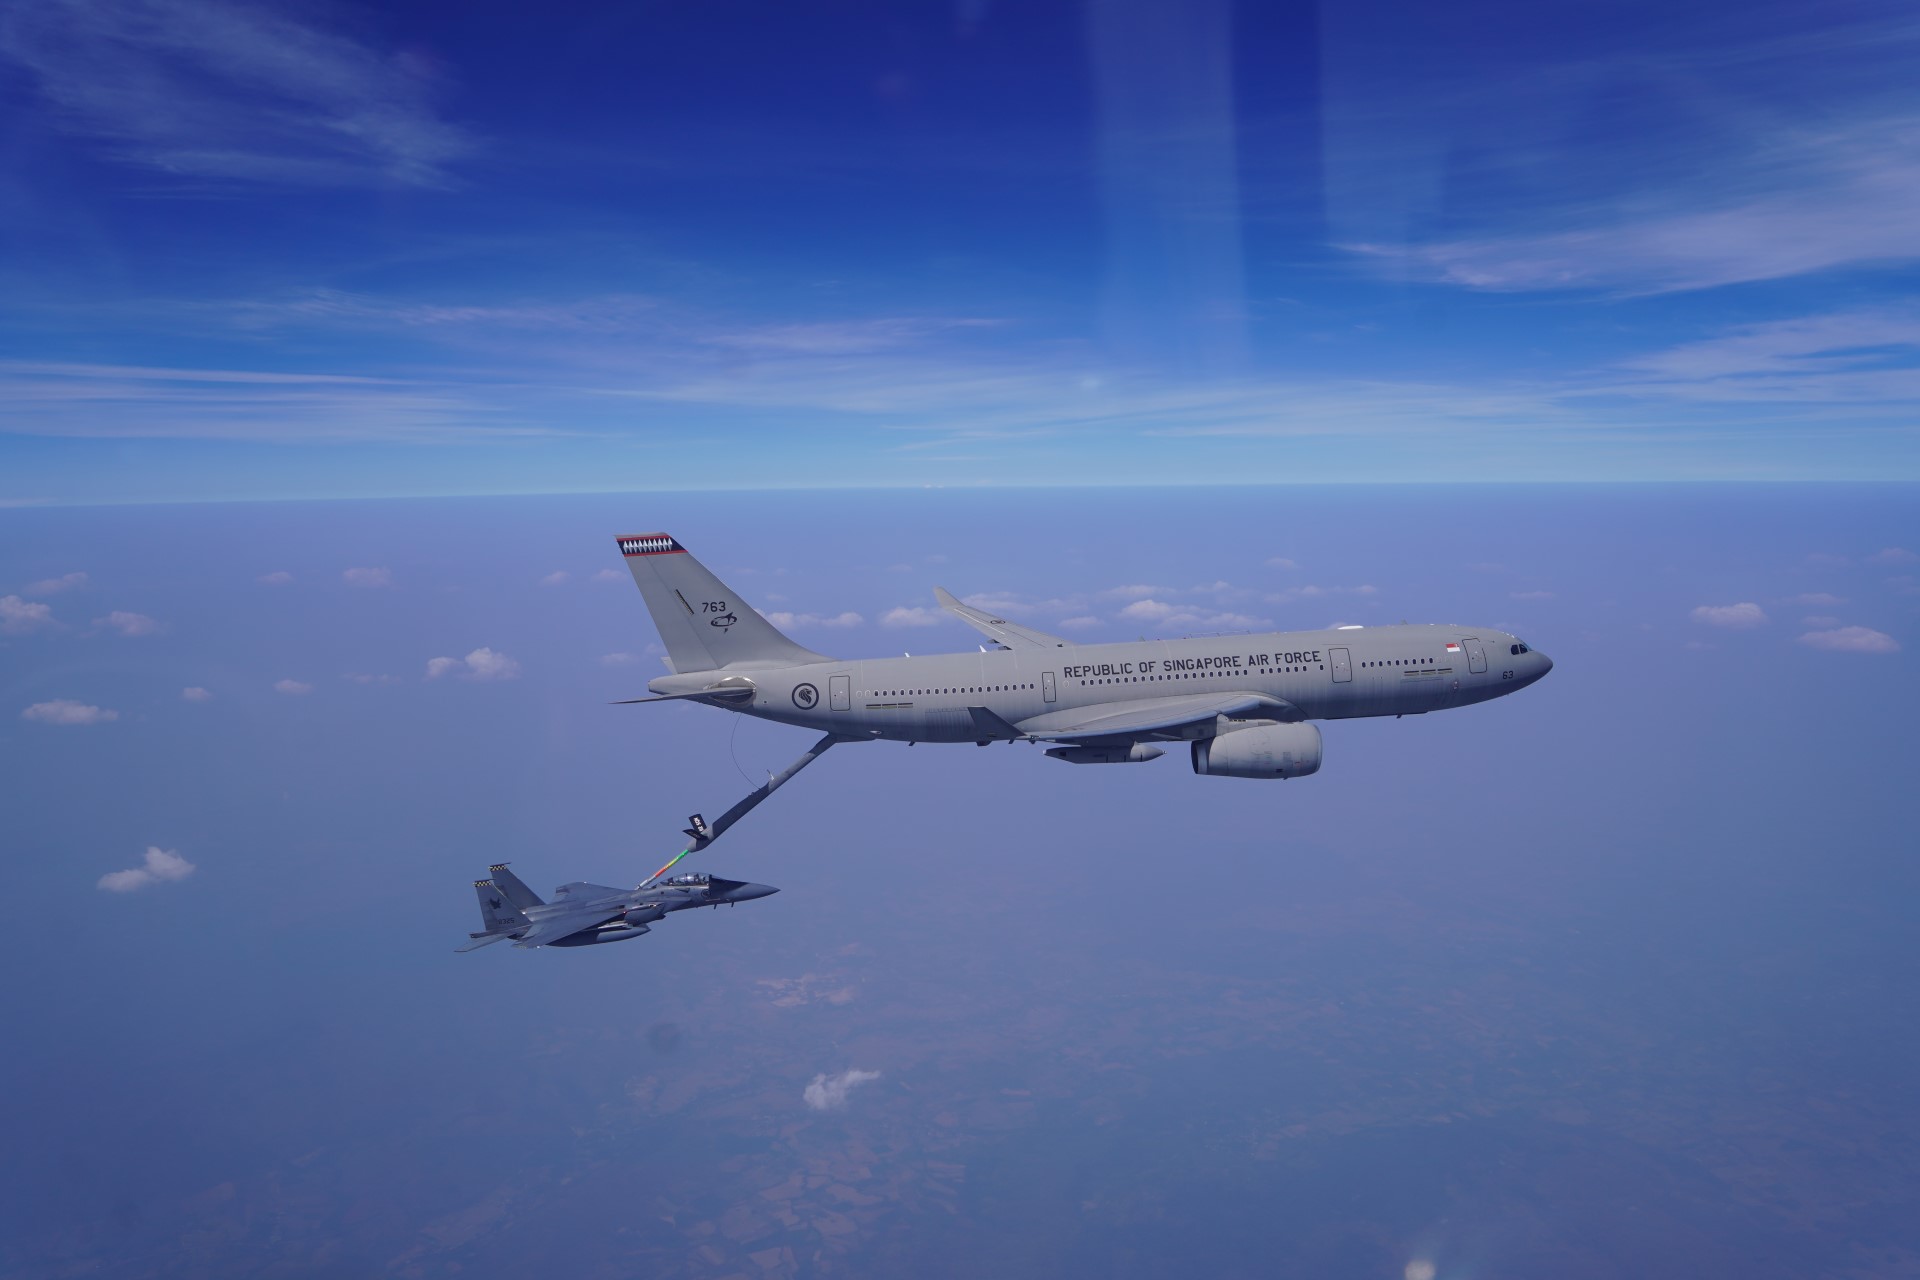 Singapore, Thailand and the United States Participate in Trilateral Air Exercise